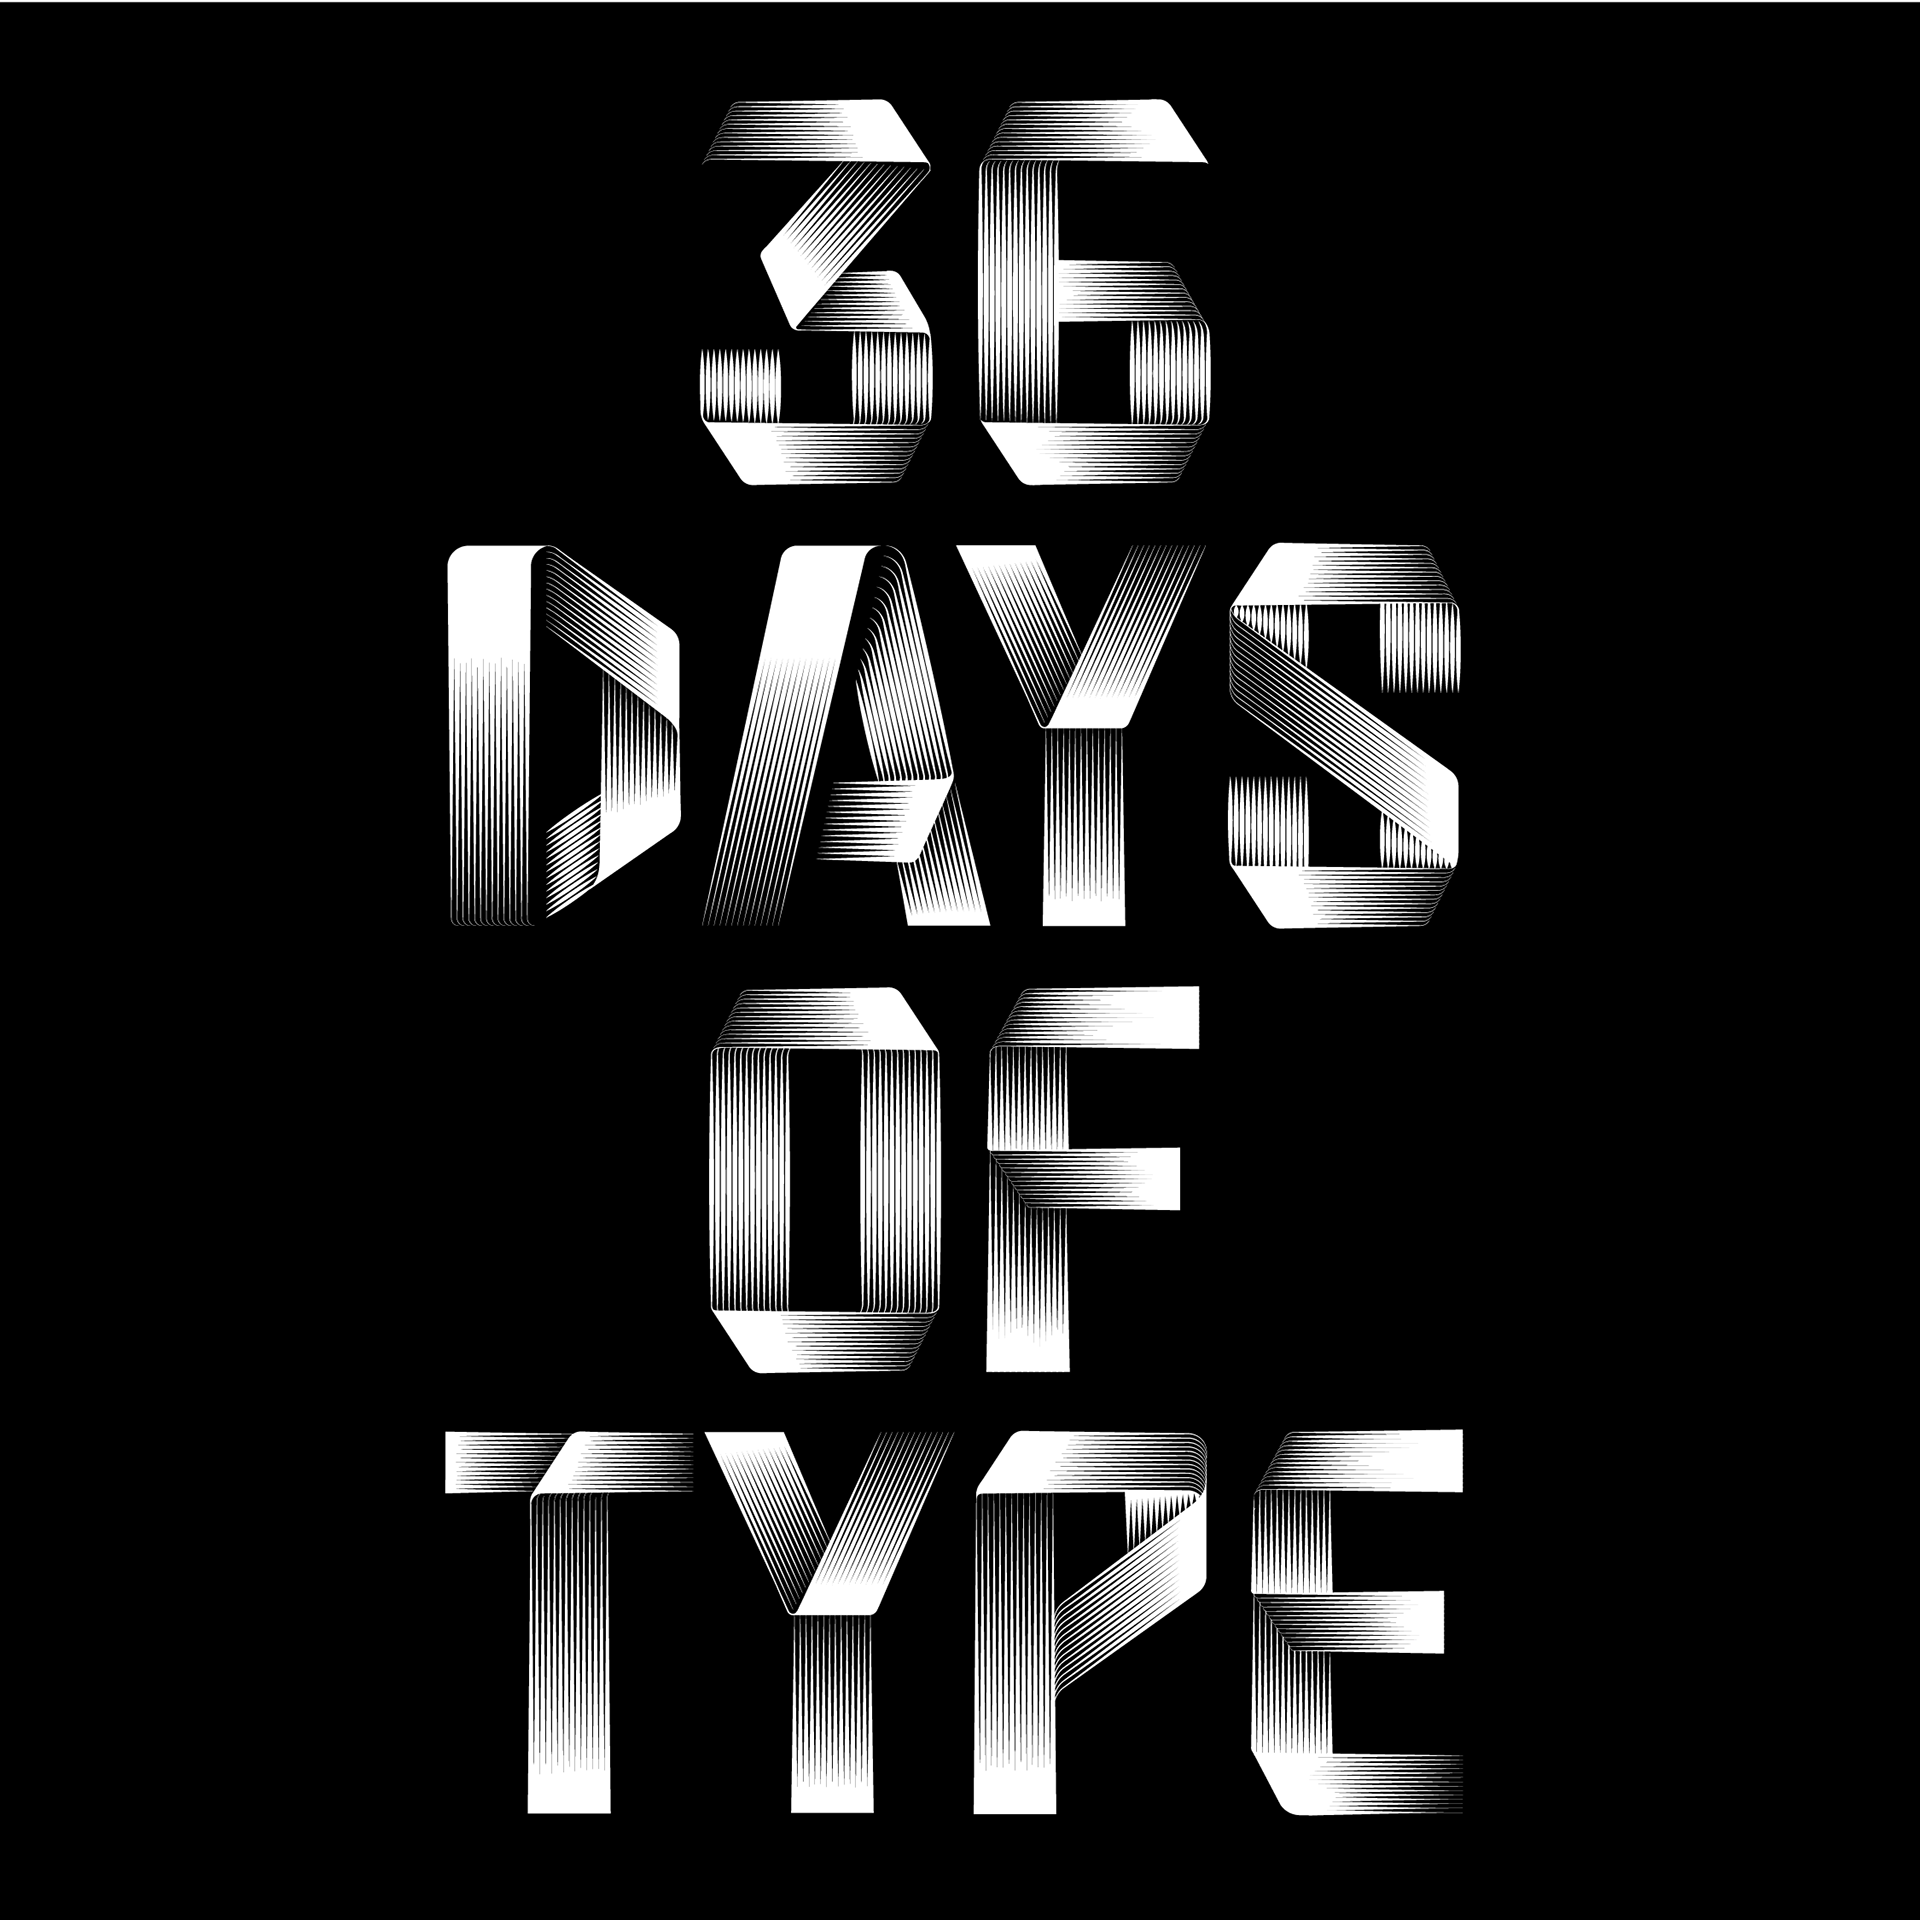 Laced Days is a free display font designed by Typefool for 36 Days of Type